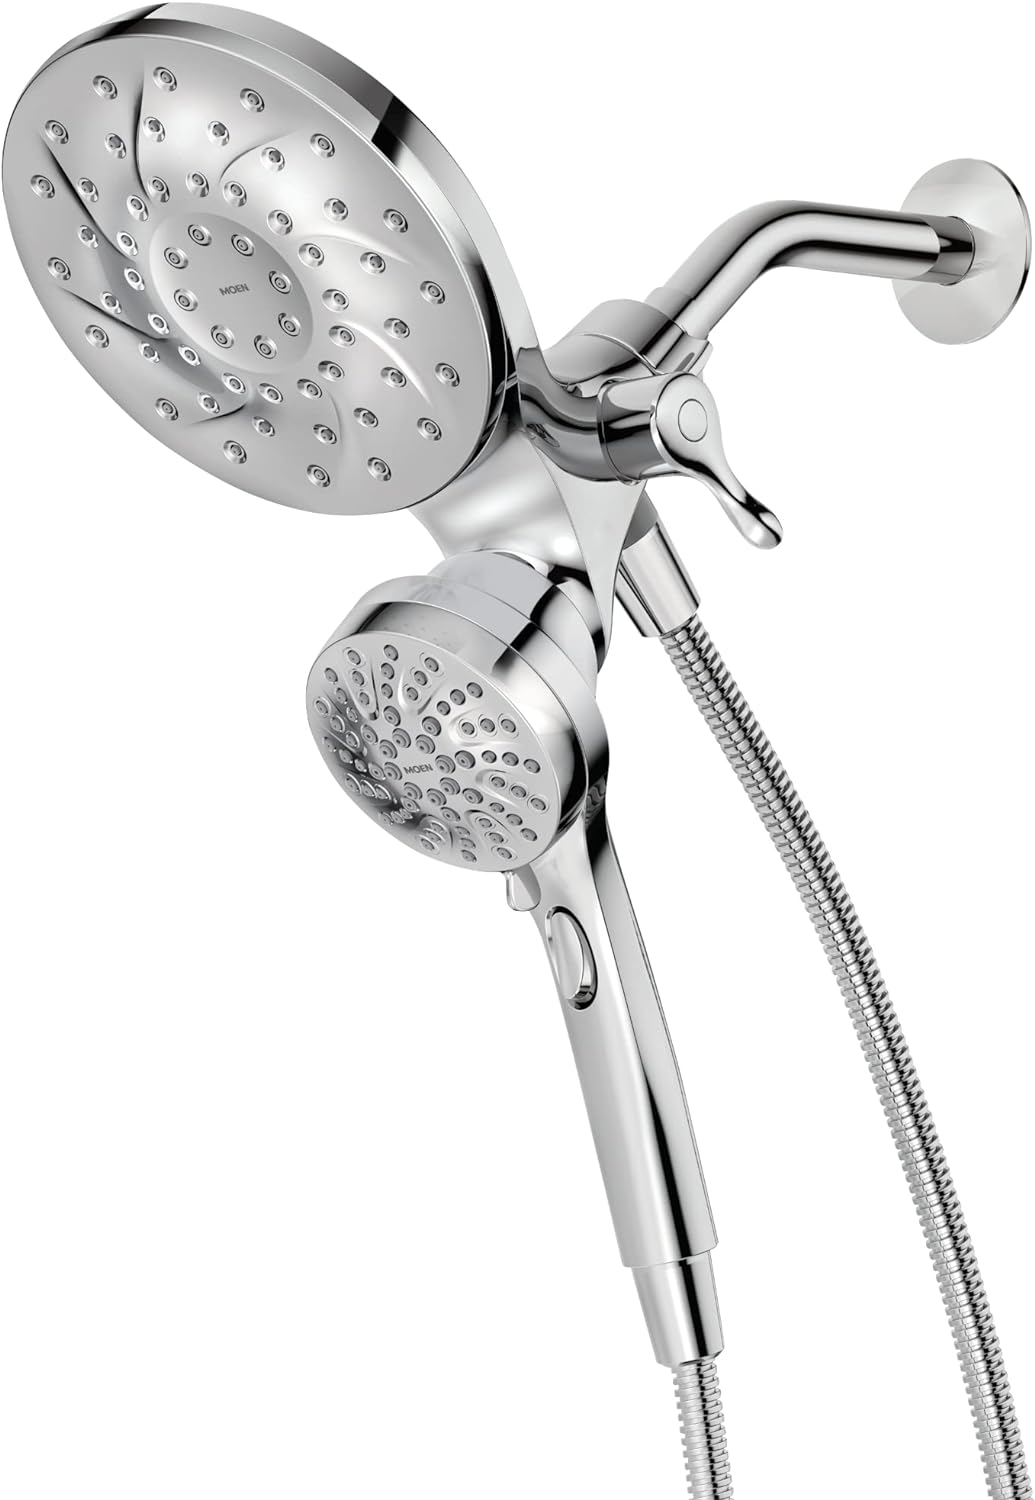 I really like this shower head. You get enough water to easily wash hair and rinse off body soap. We use both shower heads at the same time so there is enough water pressure. I like that one of the heads is magnetic so it' easy to mount when done. It looks nice in our recently renovated master bath.